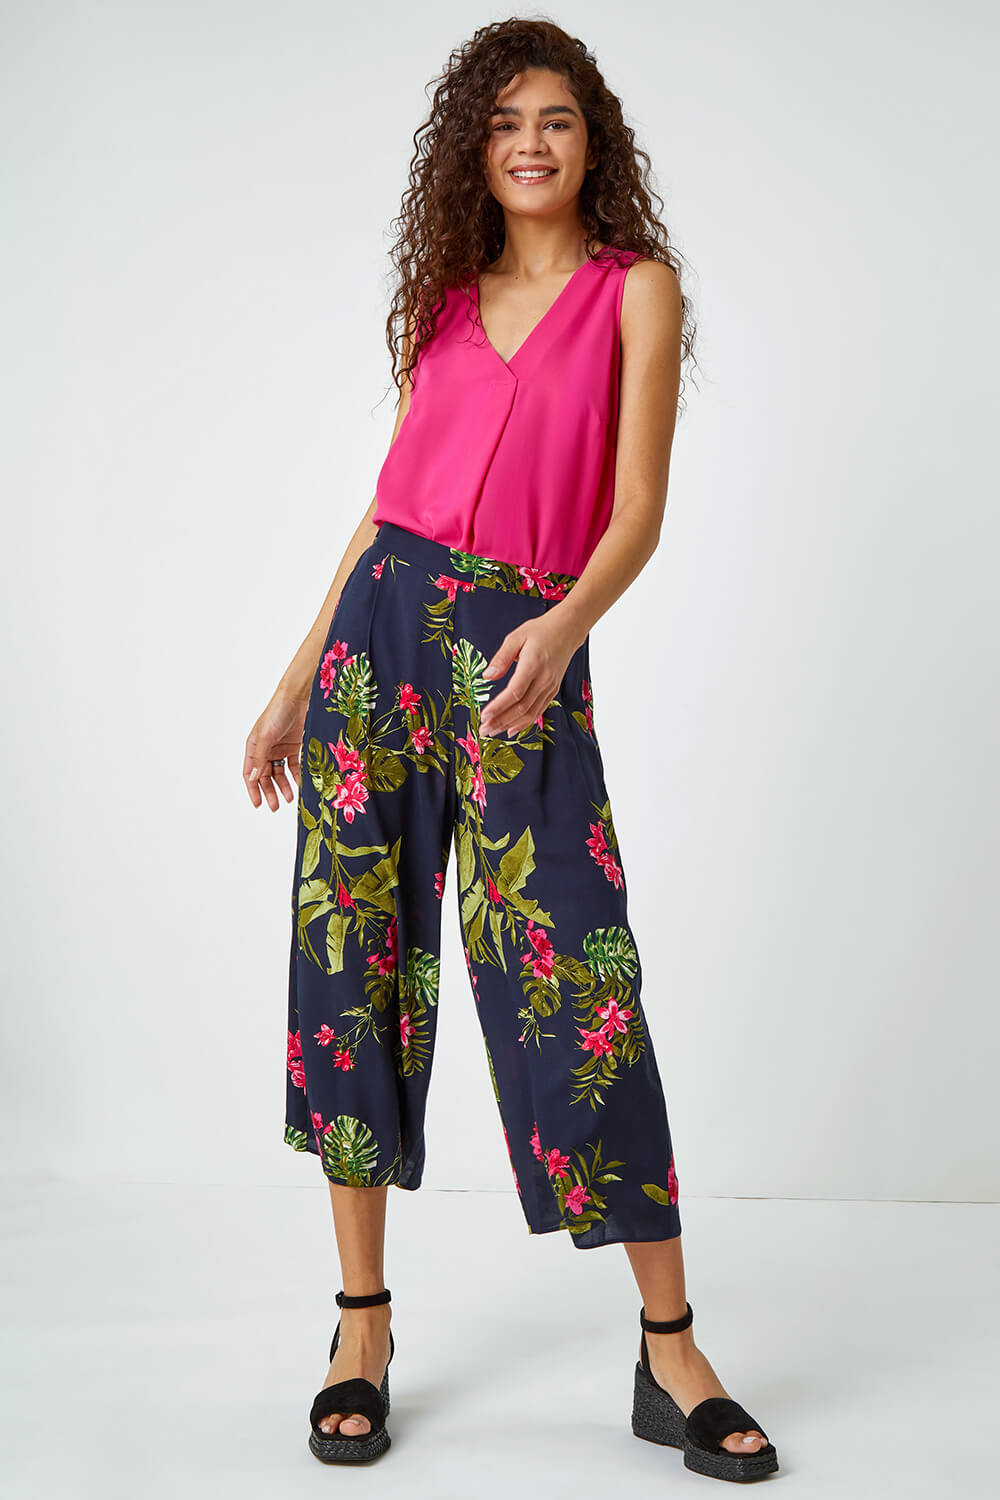 PINK Floral Palm Print Culottes, Image 2 of 5